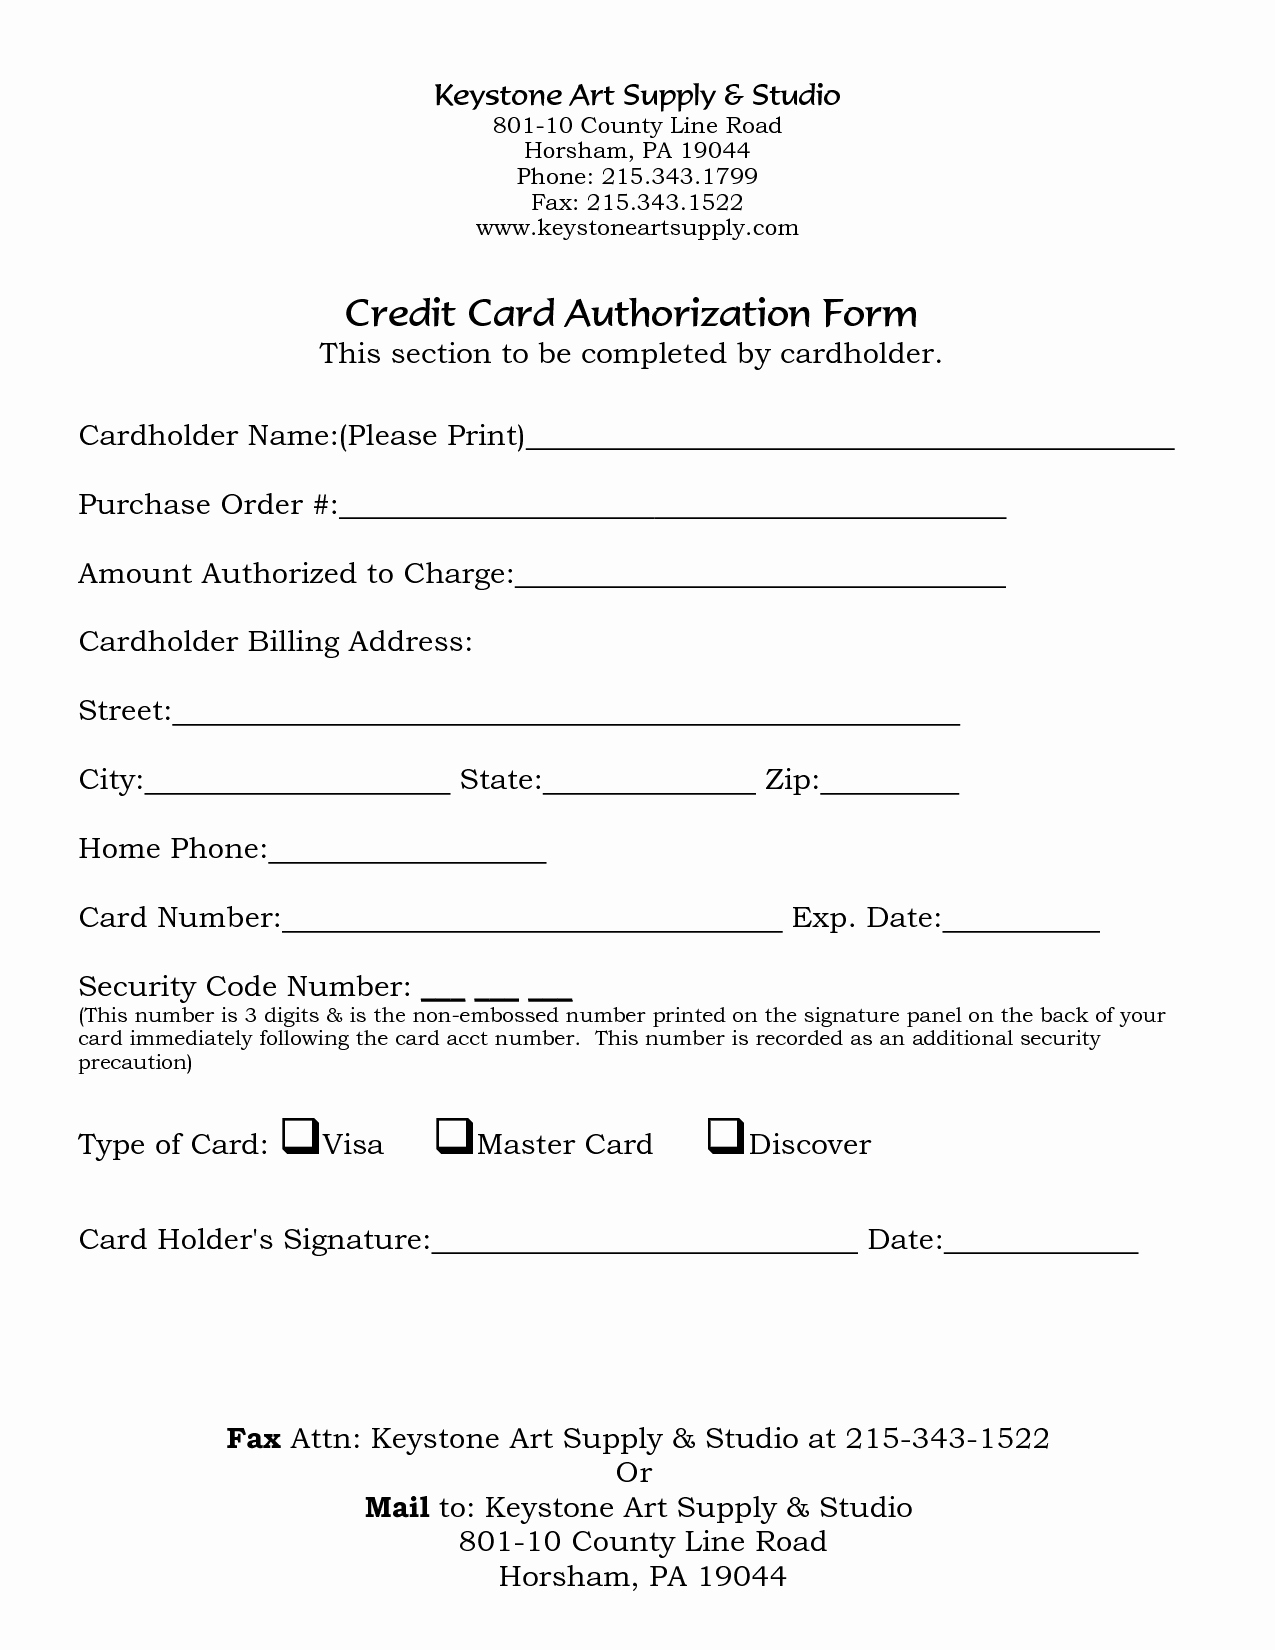 Credit Card form Template Elegant 5 Credit Card form Templates formats Examples In Word Excel